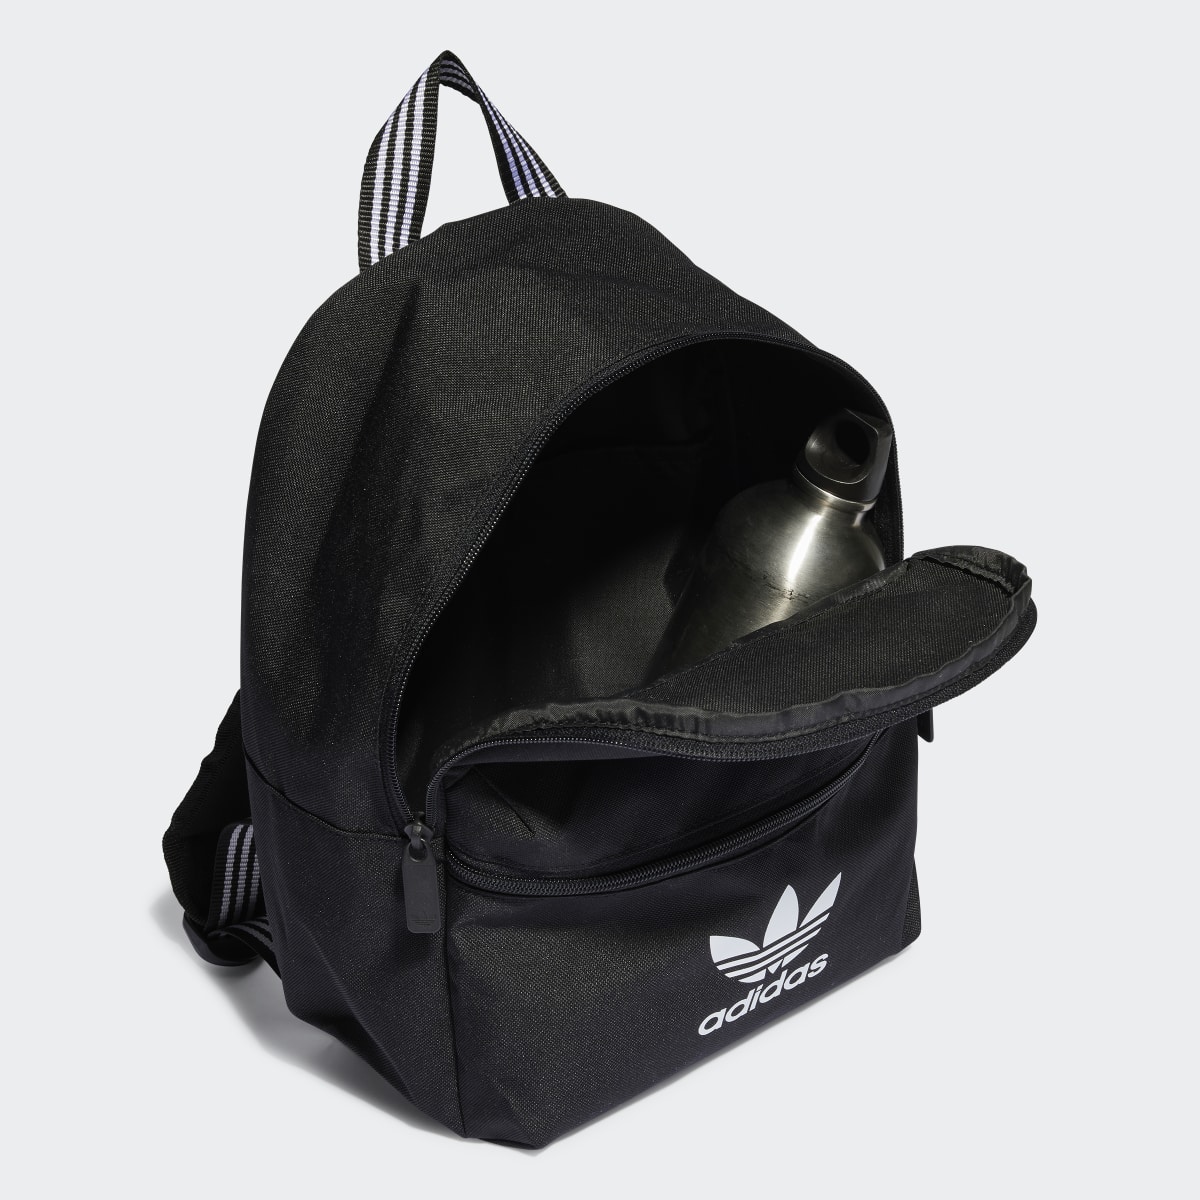 Adidas Small Adicolor Classic Backpack. 5